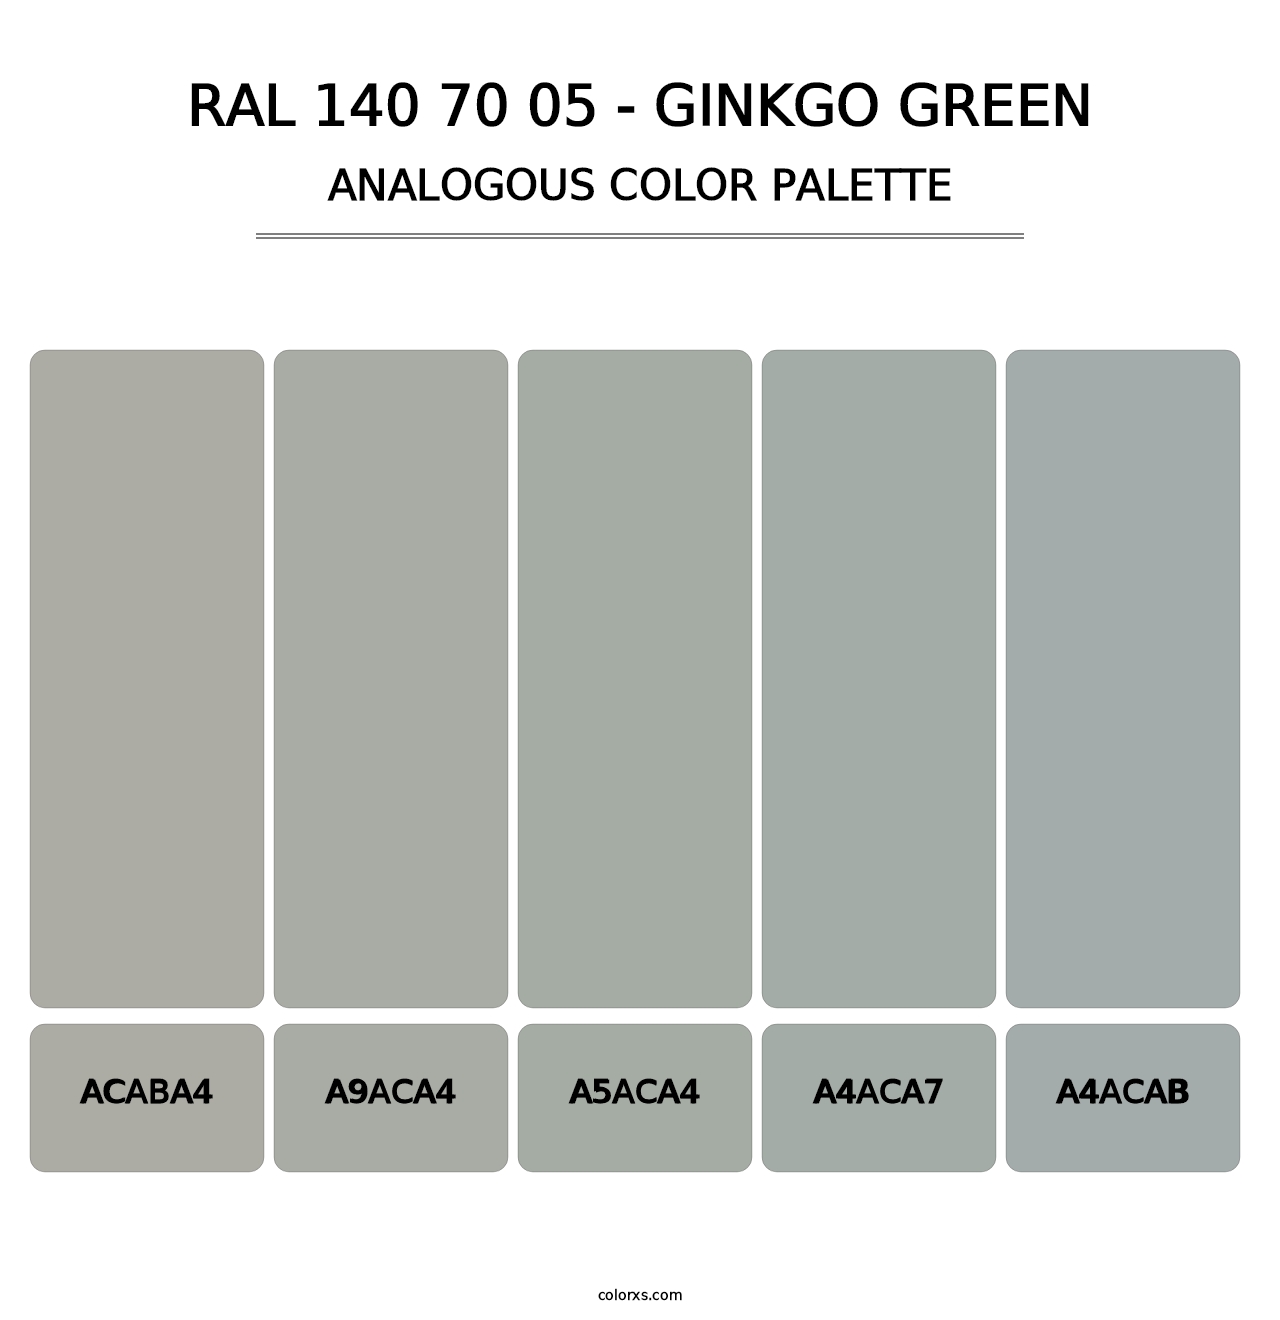 RAL 140 70 05 - Ginkgo Green - Analogous Color Palette